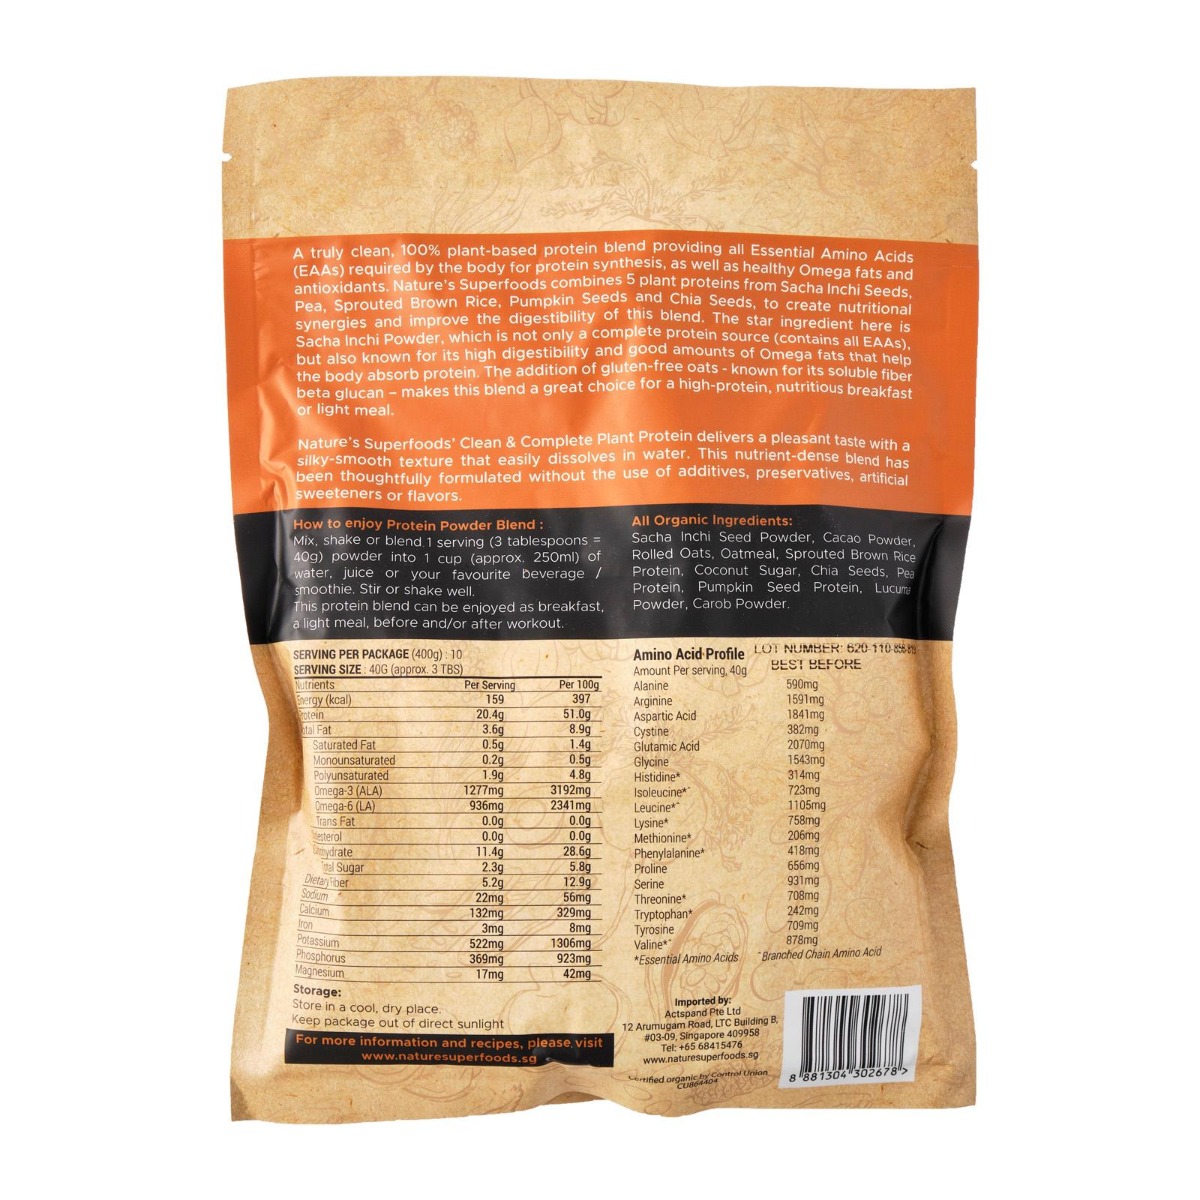 Organic Plant Protein Powder (with Cacao) - 400g resealable pack back